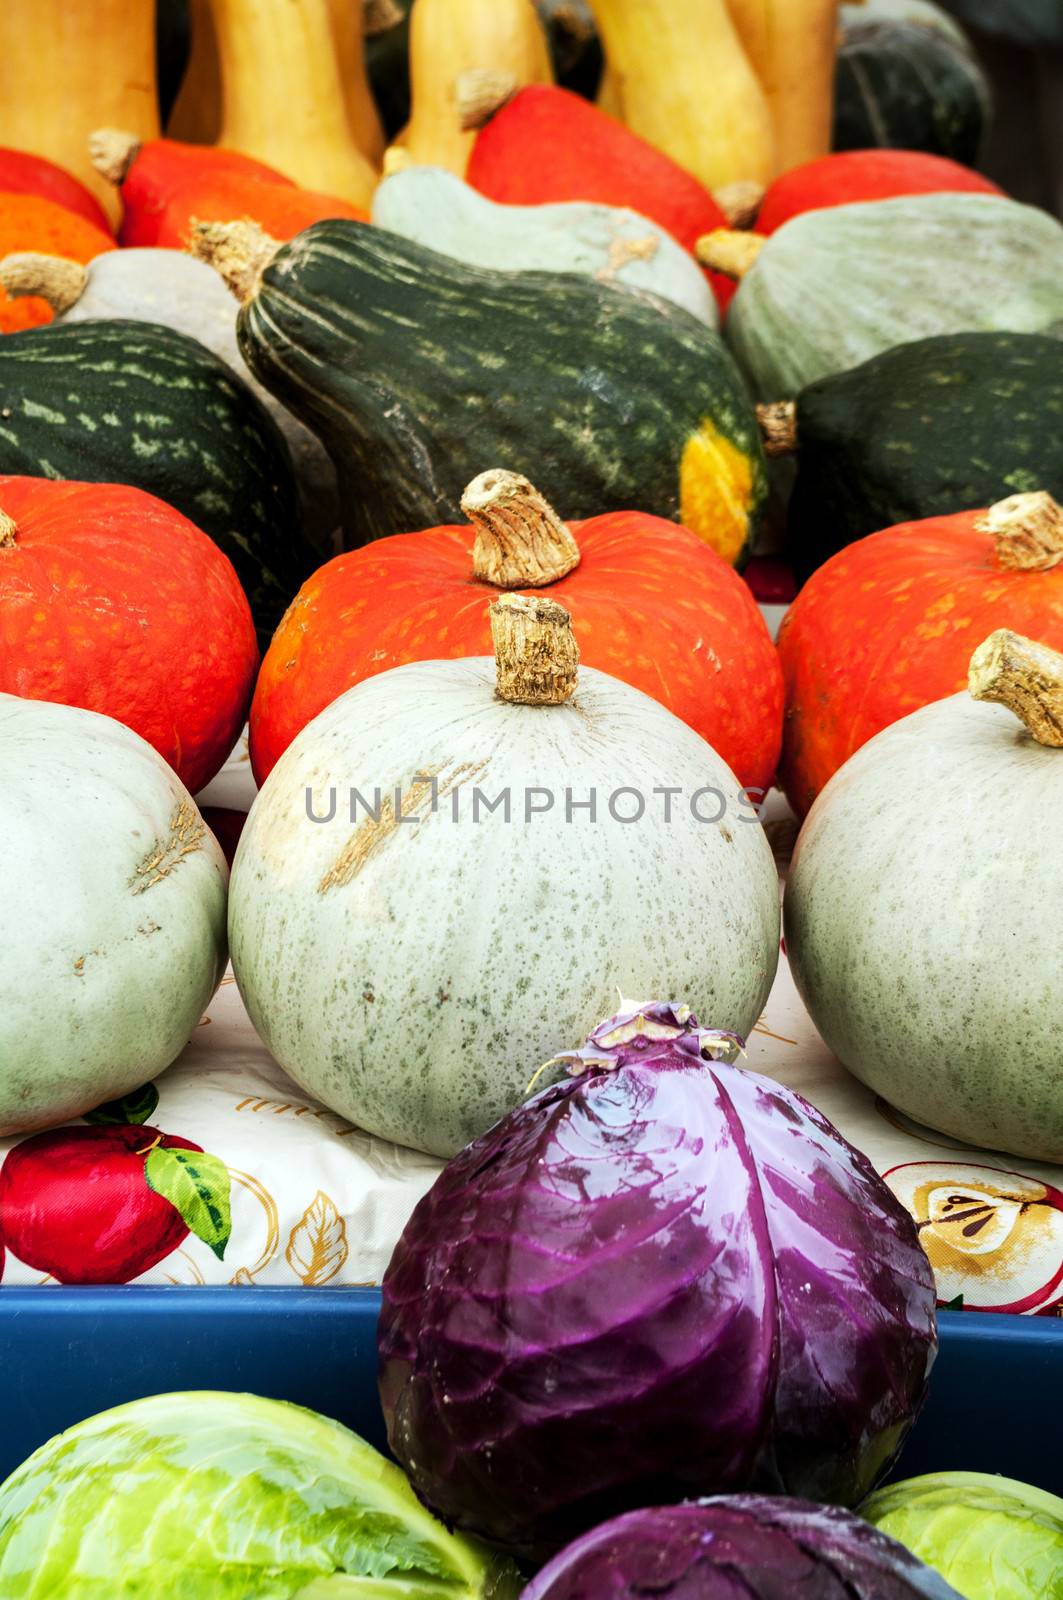 Squash and Gourds by edcorey